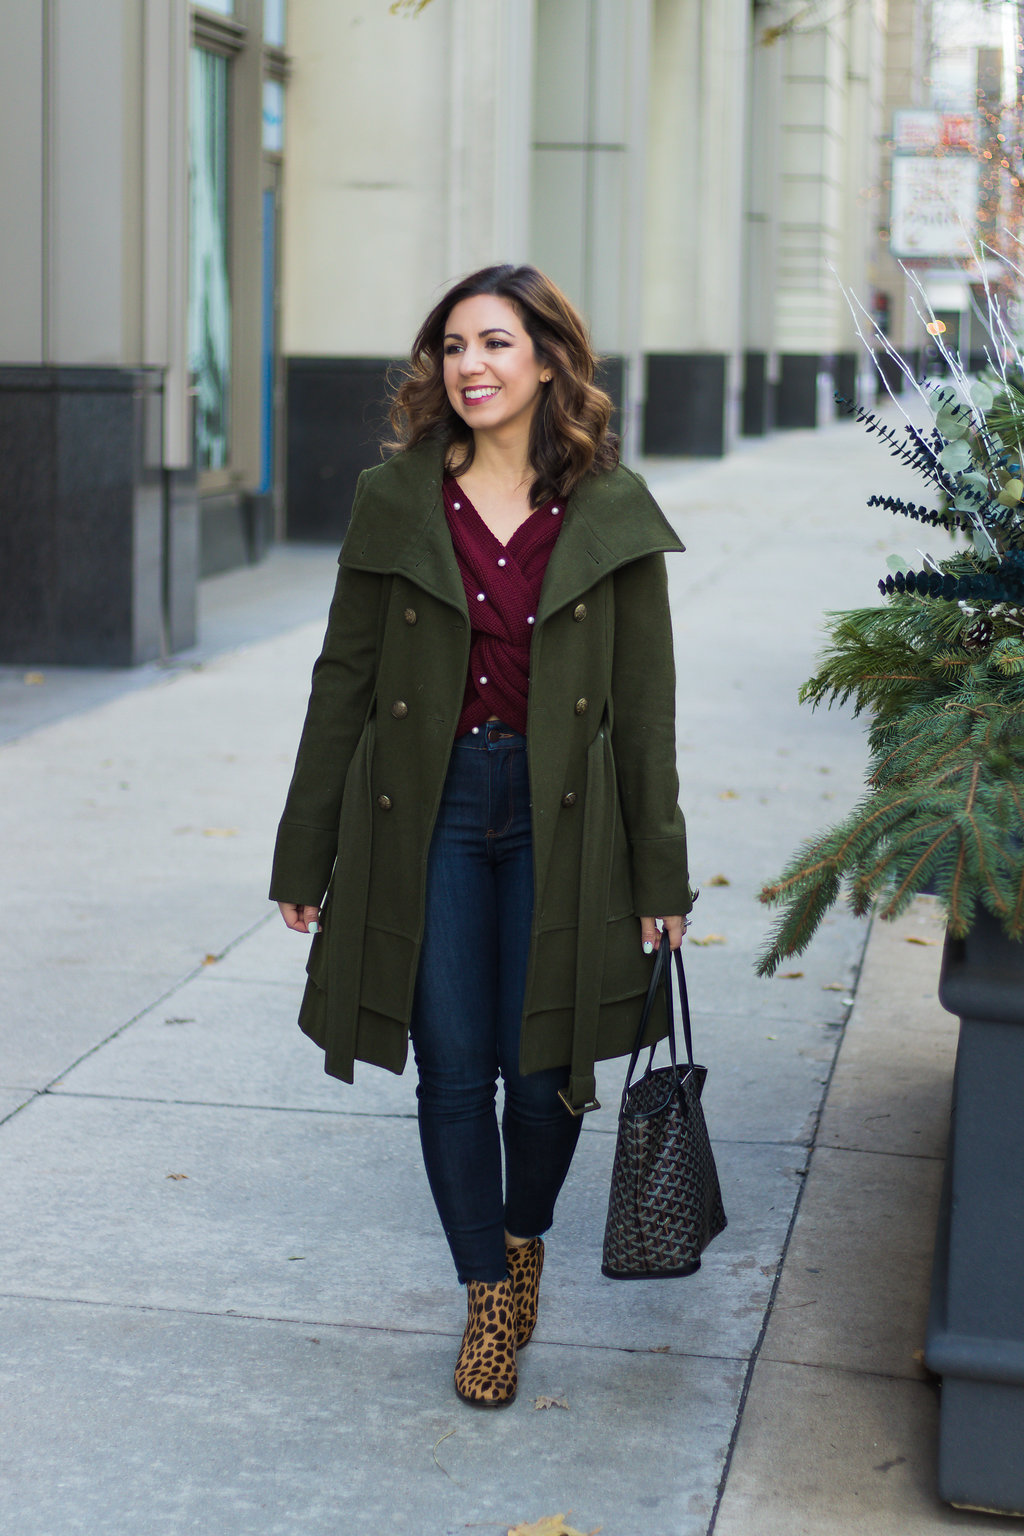 Lifestyle blogger Roxanne of Glass of Glam wearing a pearl burgundy sweater, green military jacket, Mott + Bow denim, and leopard booties